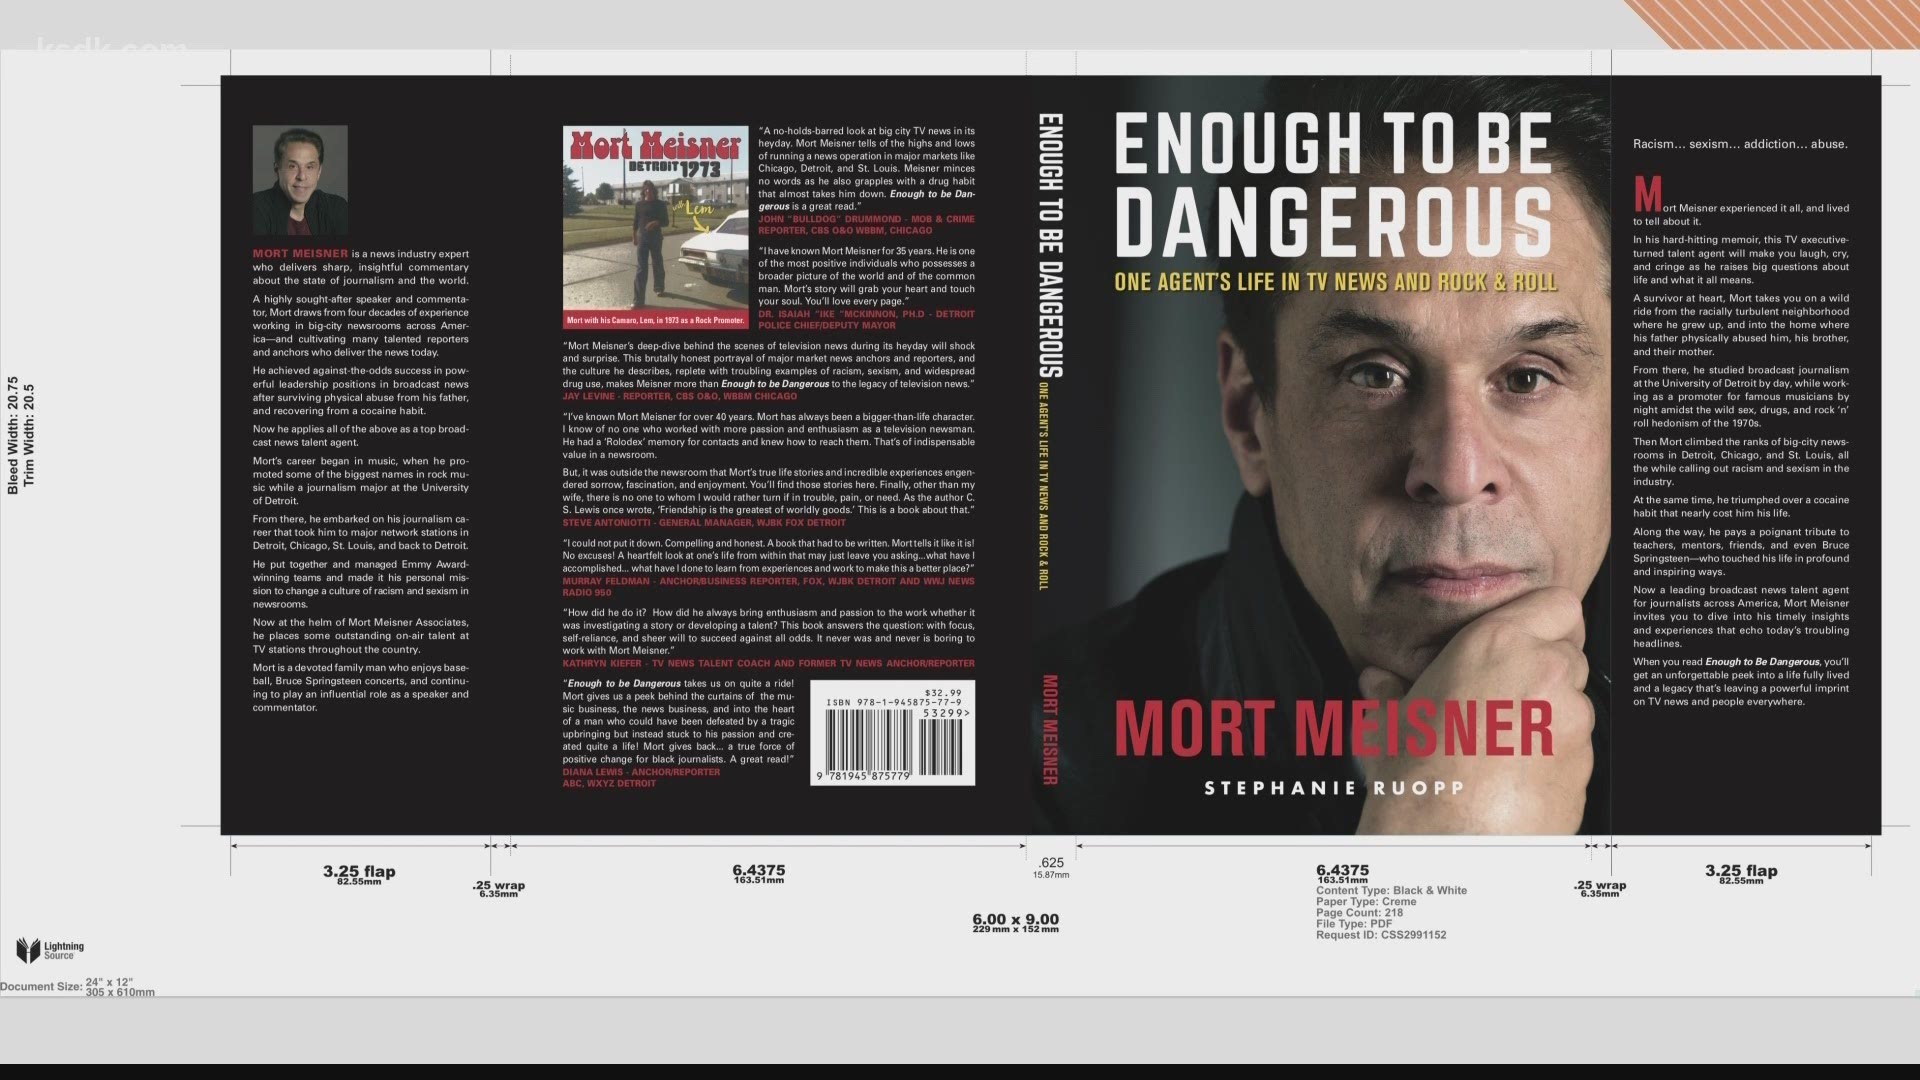 "Enough to be Dangerous" is available in book stores, on Amazon, and at MortMeisner.com.